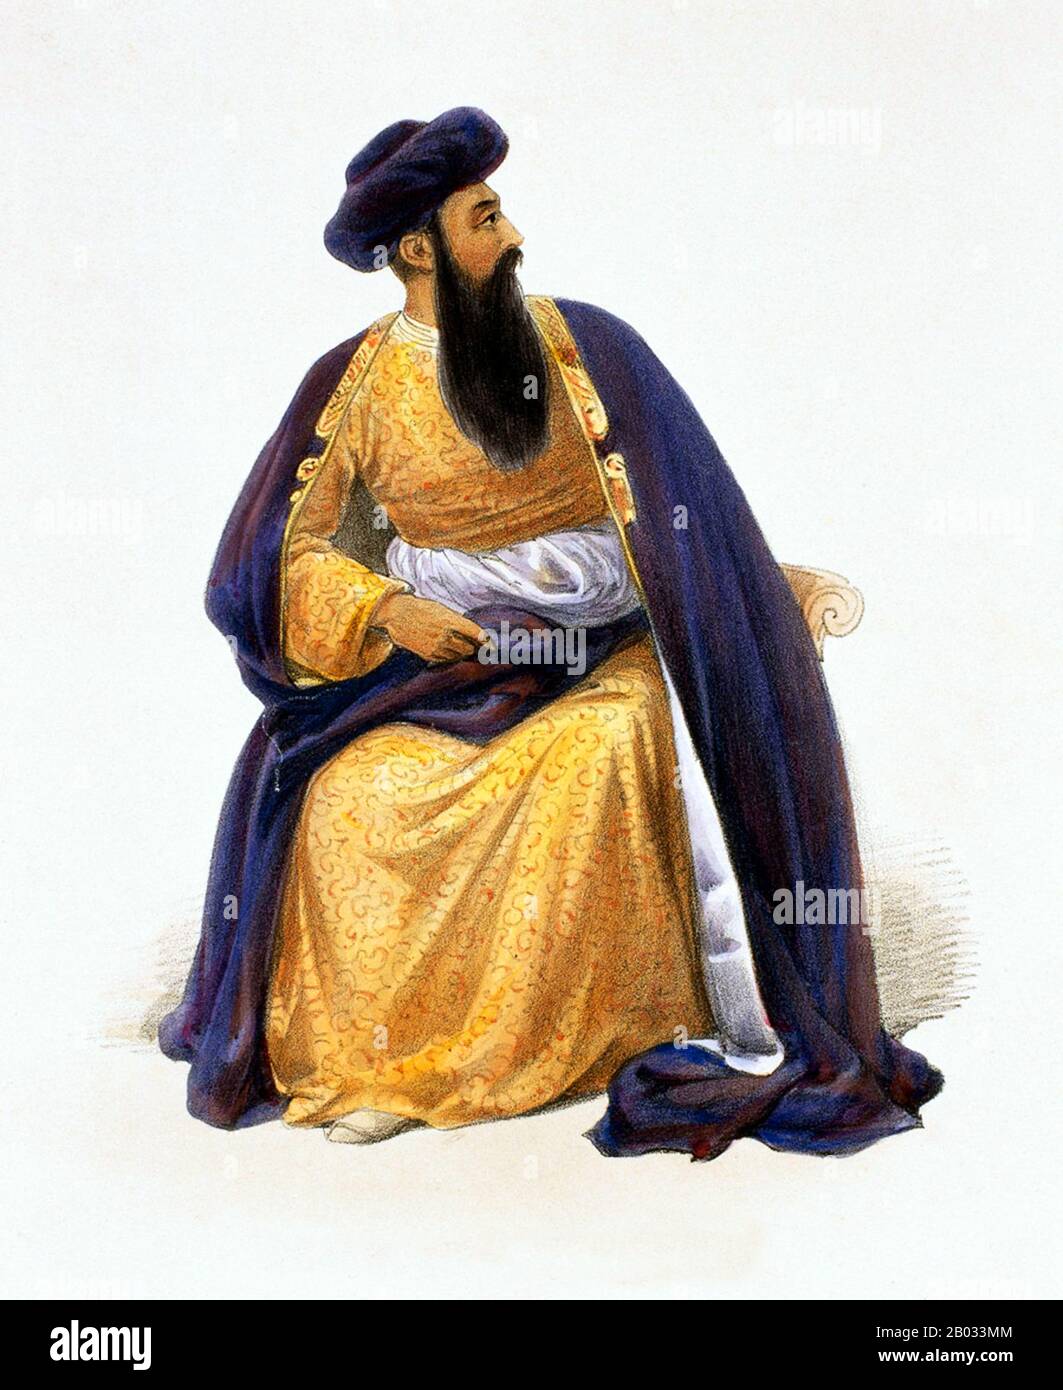 Shah Shujah-ul-Mulk (1785-1842) was the Amir of Afghanistan from 1802 until 1809 when he was driven out by his rival Mahmud Shah. During the First Afghan War (1838-42), the Governor-General of India Lord Auckland, attempted to restore Shah Shujah against the wishes of the Afghan people.  In summer of 1839 the British-Indian Army of the Indus, under the command of Sir John Keane, captured Kandahar and the fortress of Ghazni. They then advanced north towards Kabul. Amir Dost Mohammed fled from the capital and Shah Shujah was duly installed in his place in August 1839.  After his British backers Stock Photo